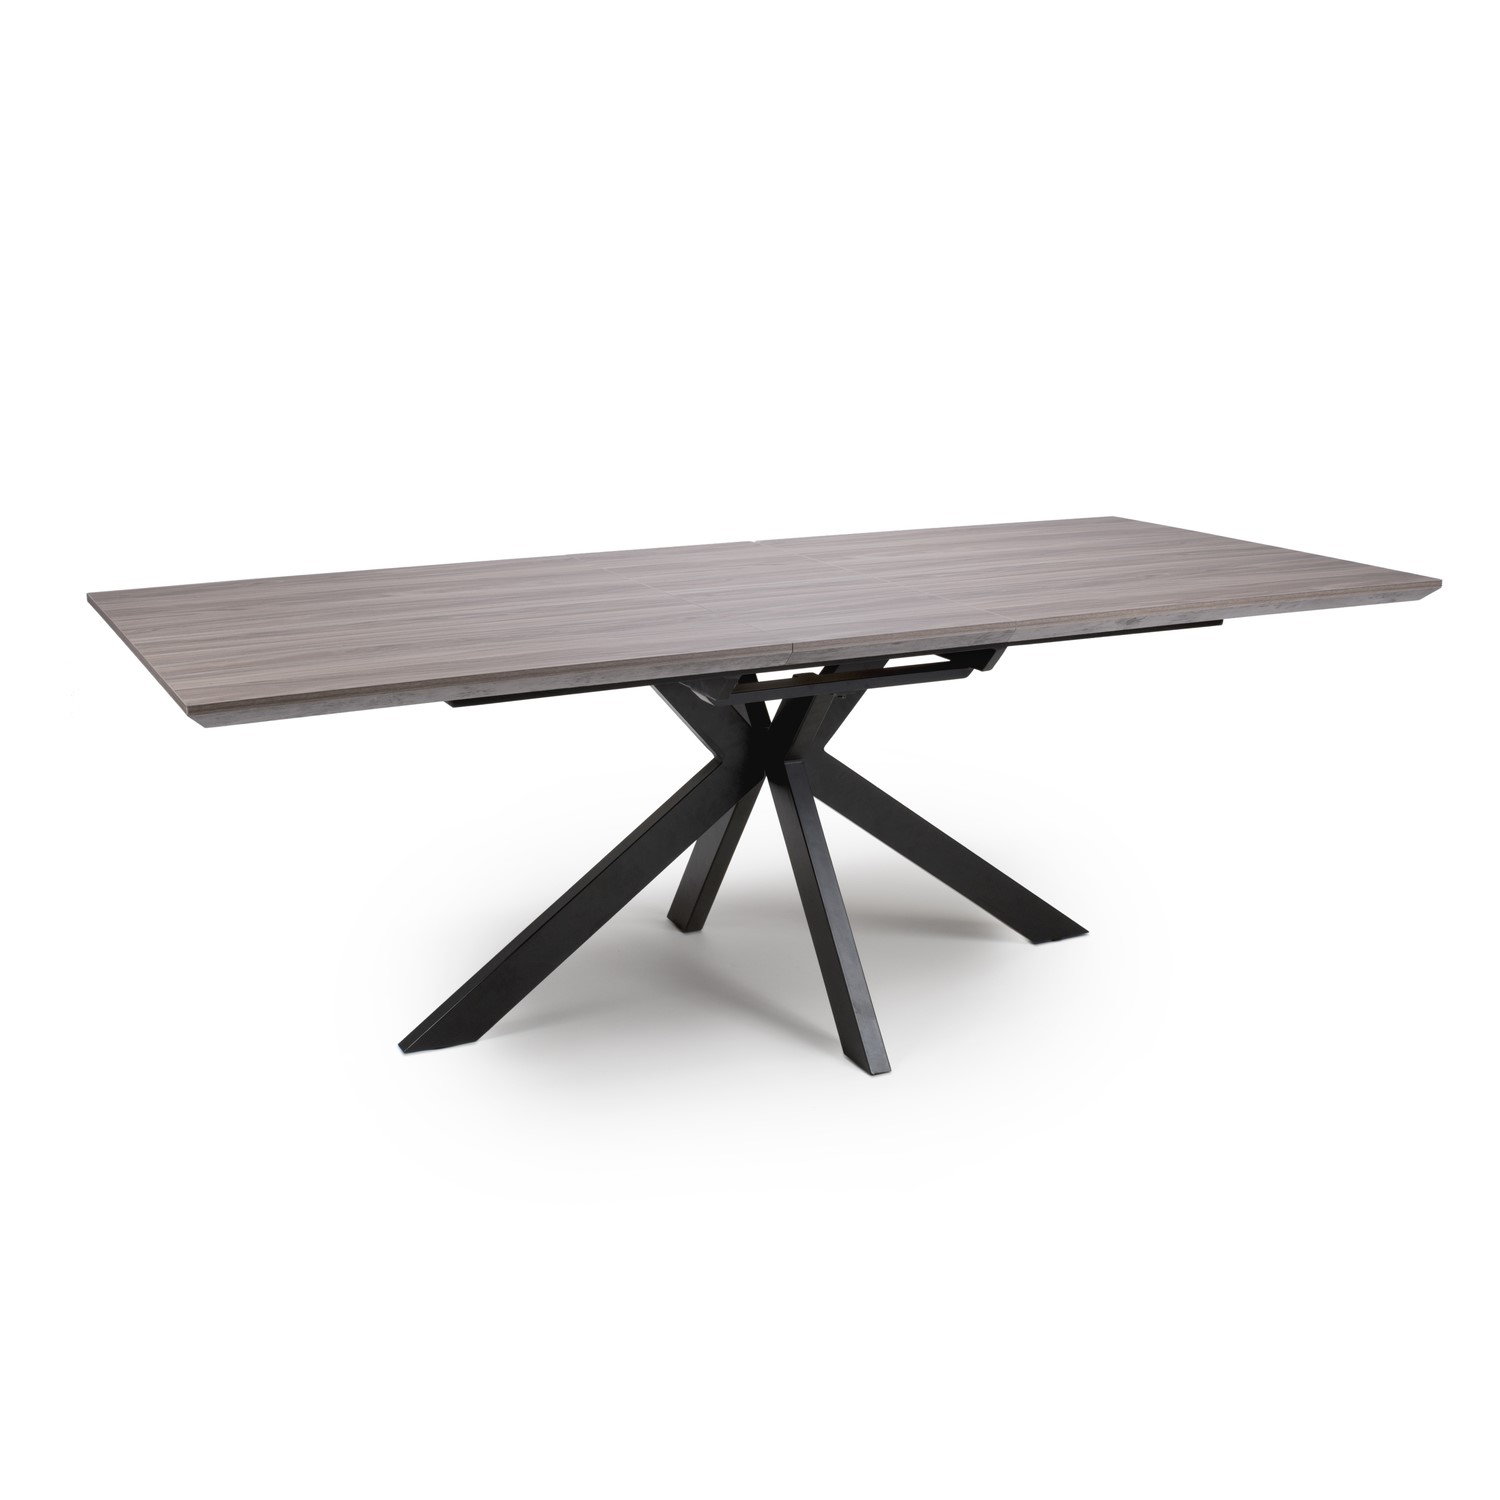 Photo of Grey extendable dining table- seats 4-8 - liberty